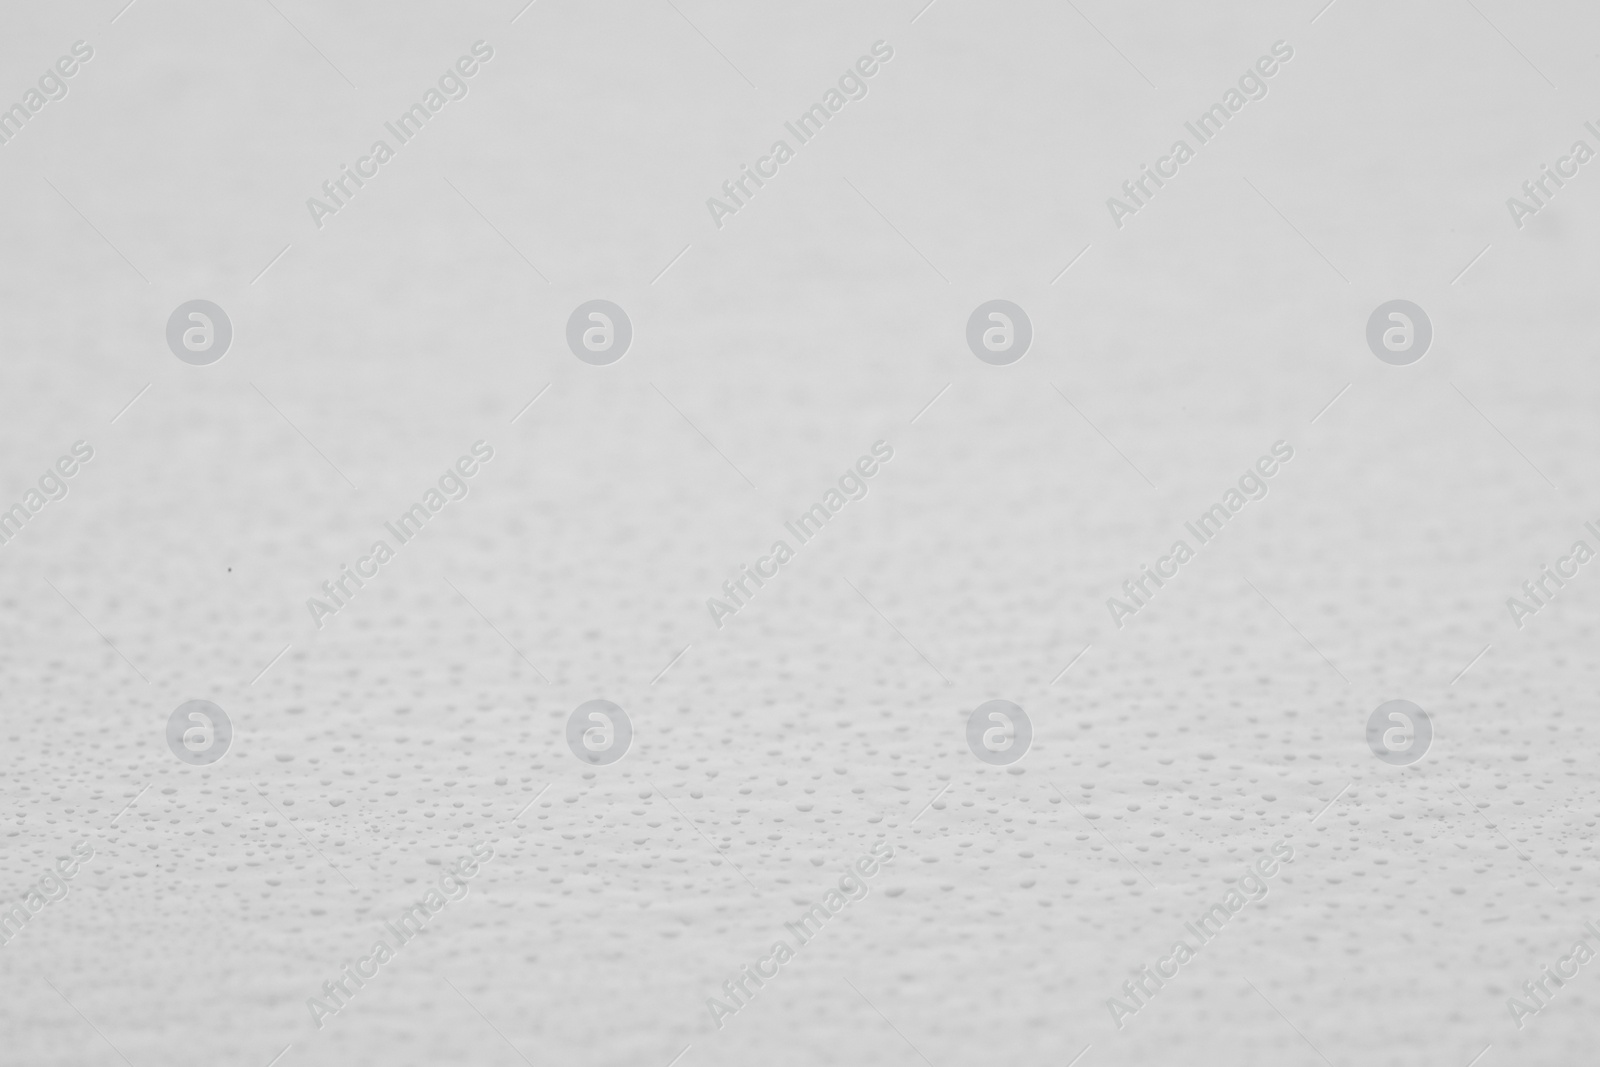 Photo of Water drops on light background, closeup view